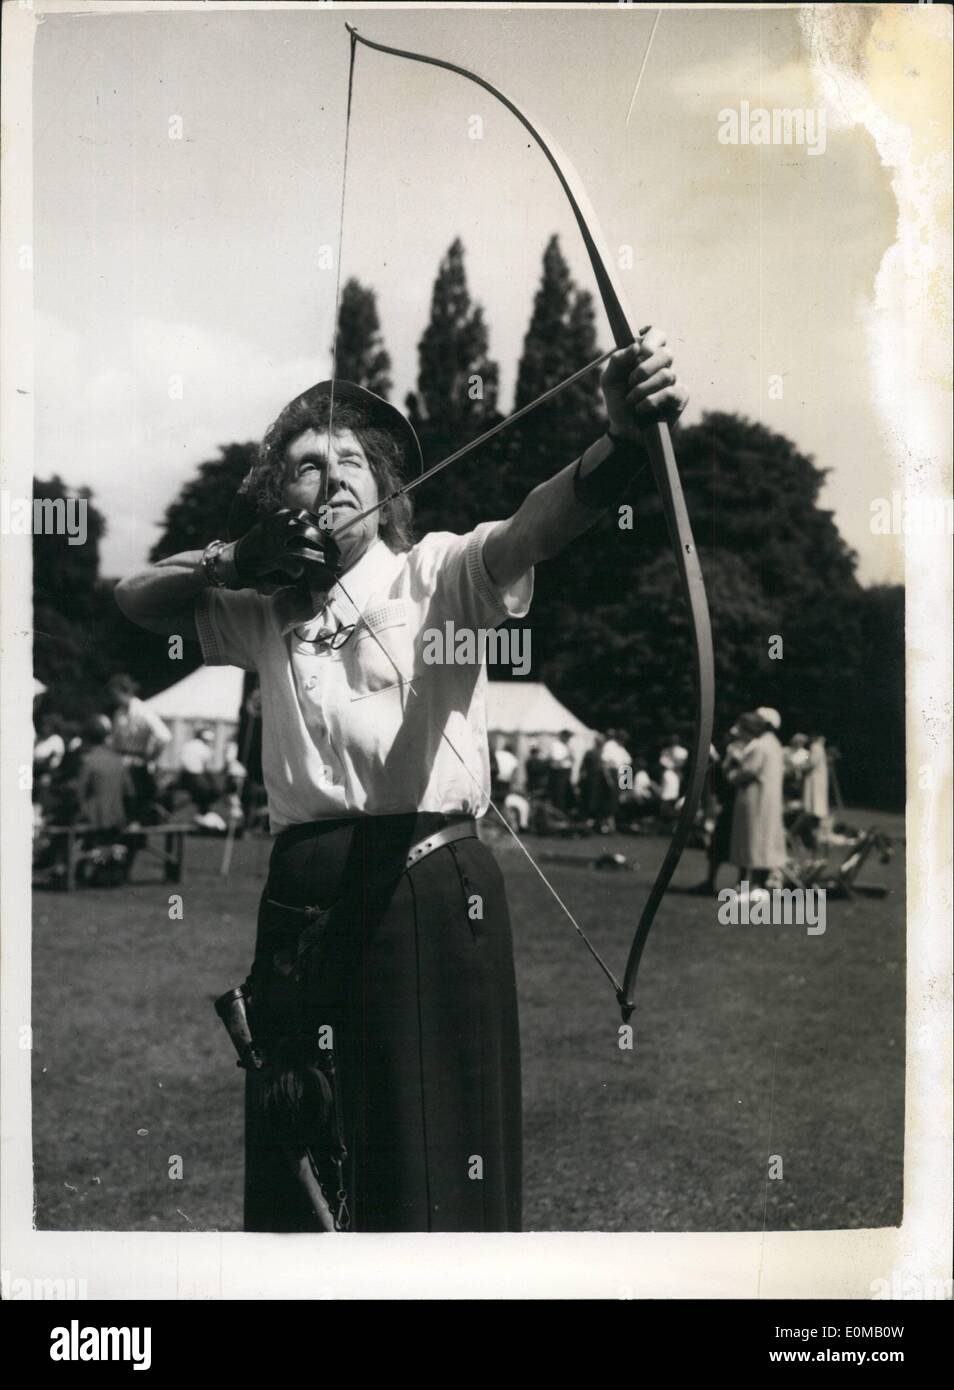 Jul. 07, 1954 - Archers hold their United Kingdom championships. The Eighty Eight year old Competitor: The United Kingdom Championships of the Grand National Archery society is being held in the grounds of Worcester College, Oxford. More than 200 are taking part in the meeting which is the 101st. National meeting. Photo shows the oldest competitor - Mrs. Hilda Overton (88) who comes from Liphook, Hants takes aim at the meeting today. Stock Photo